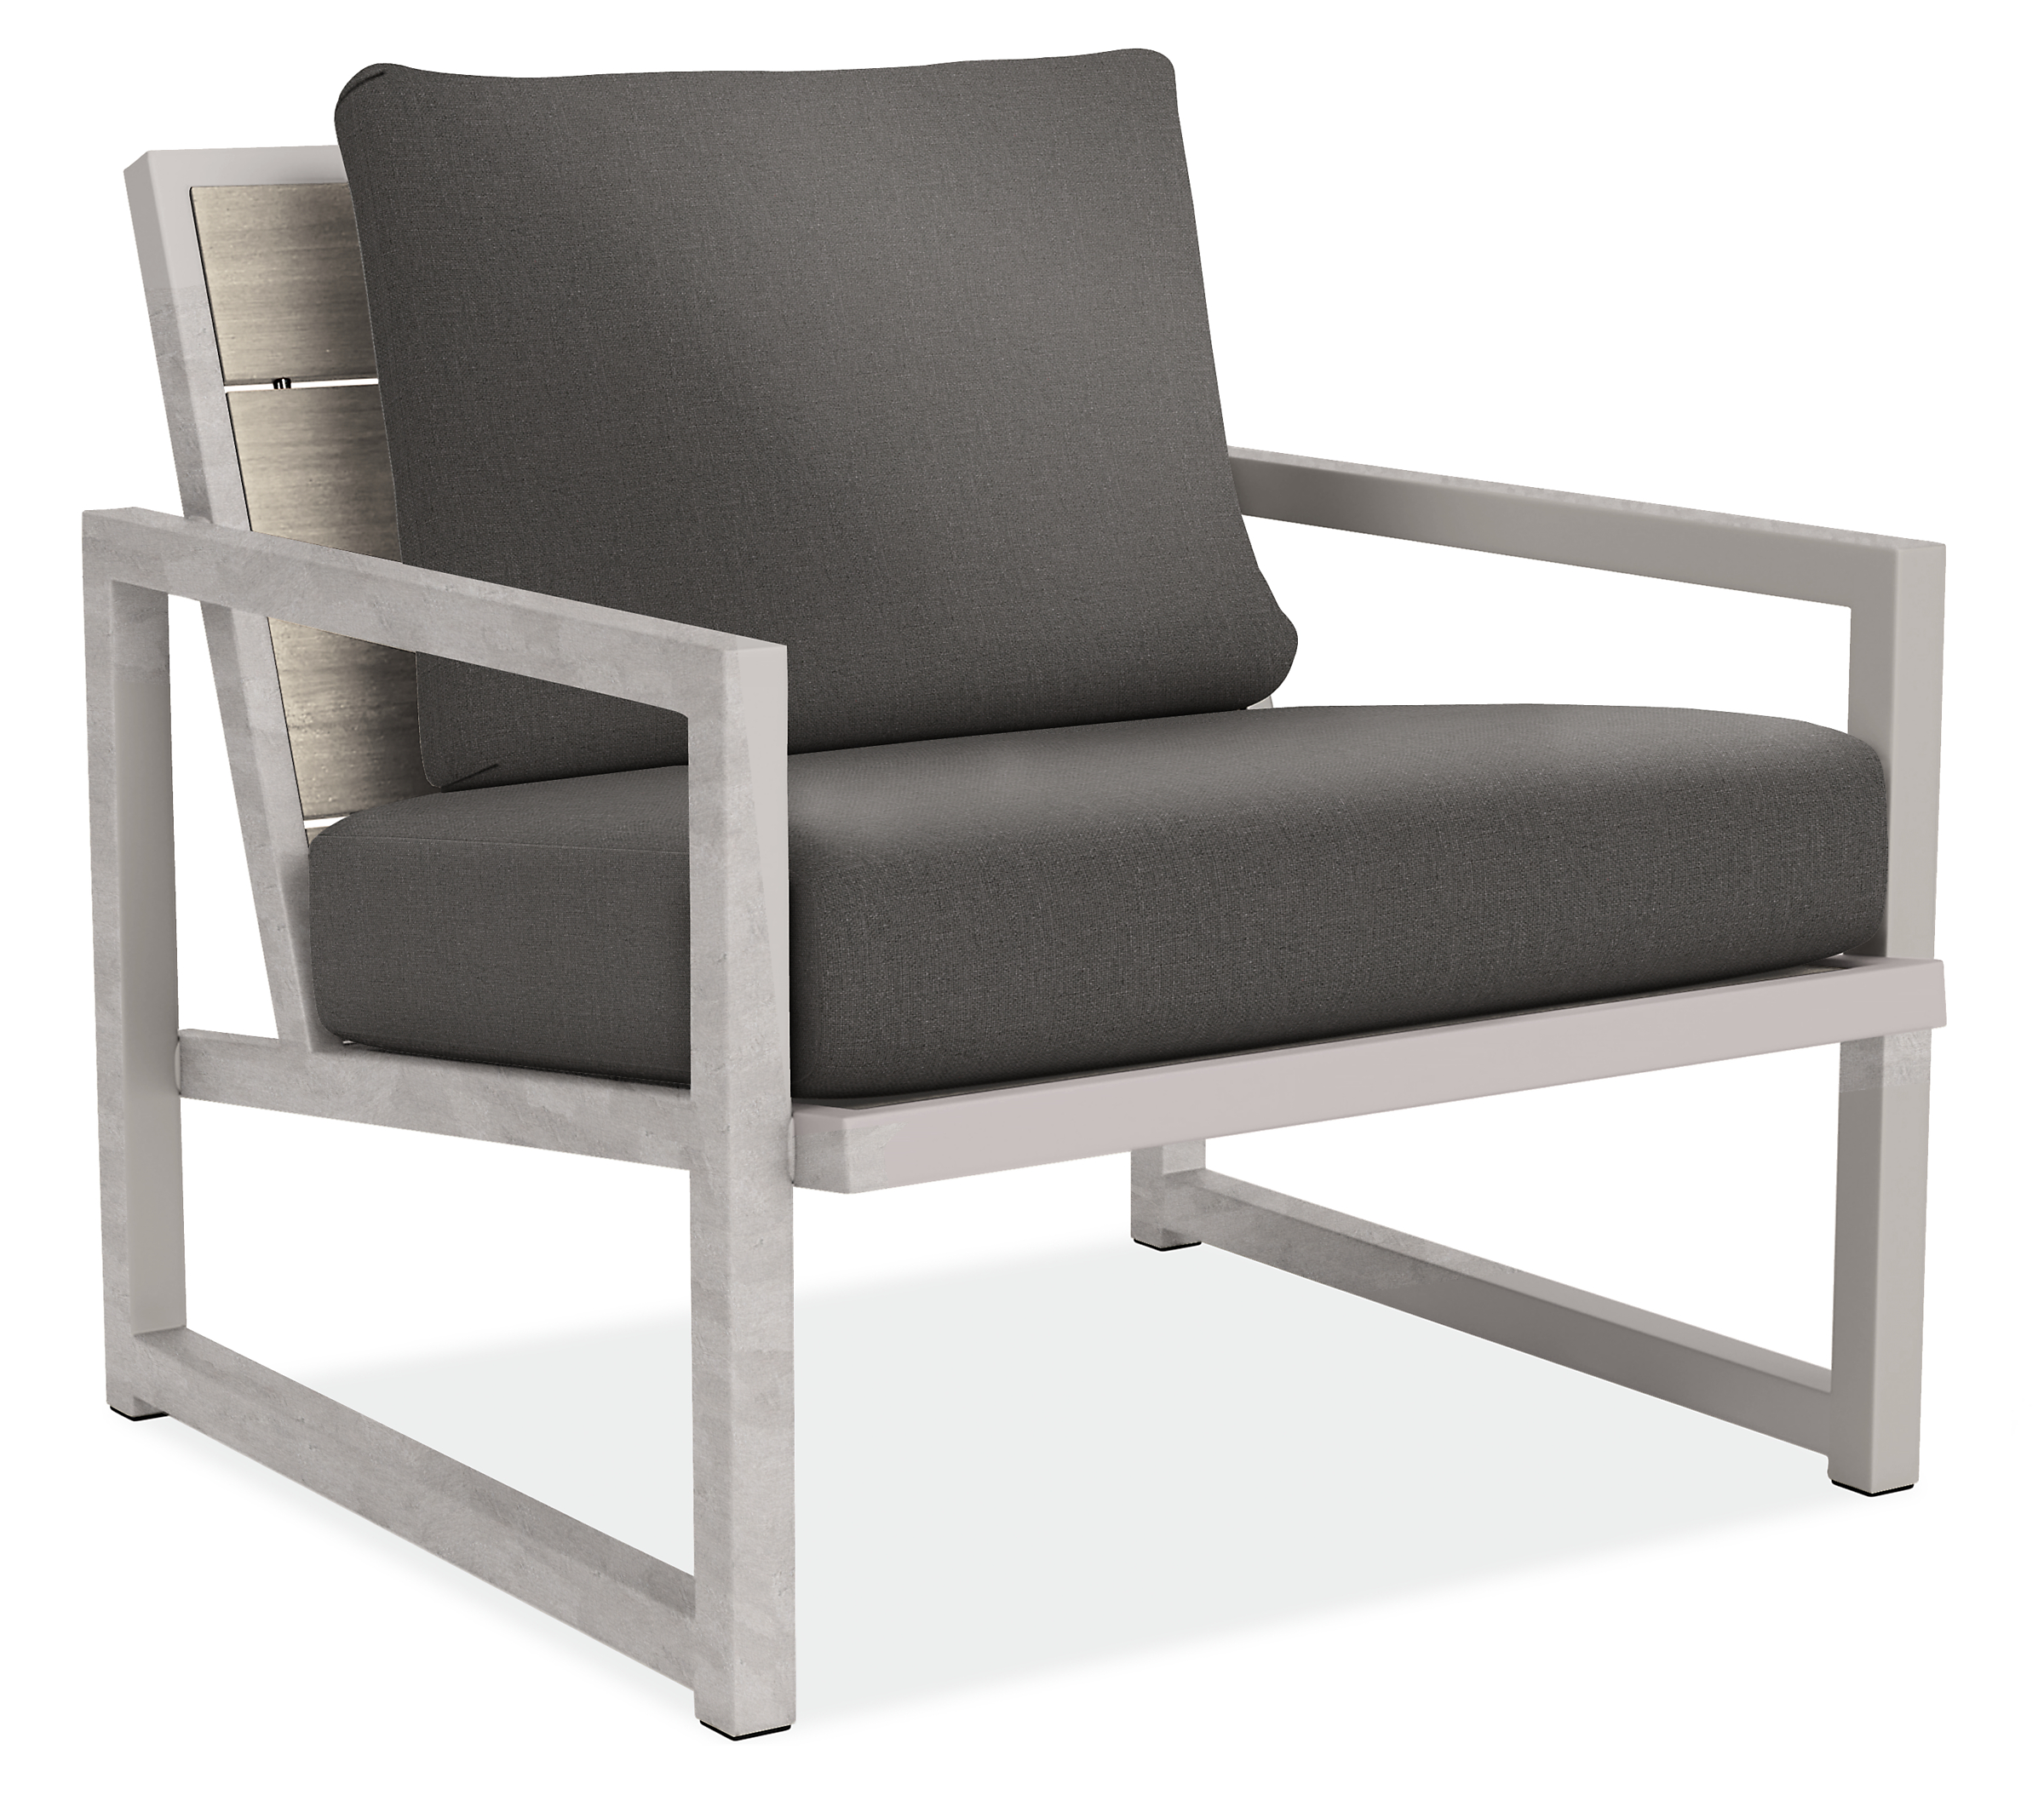 Montego Lounge Chairs in Urban Wood